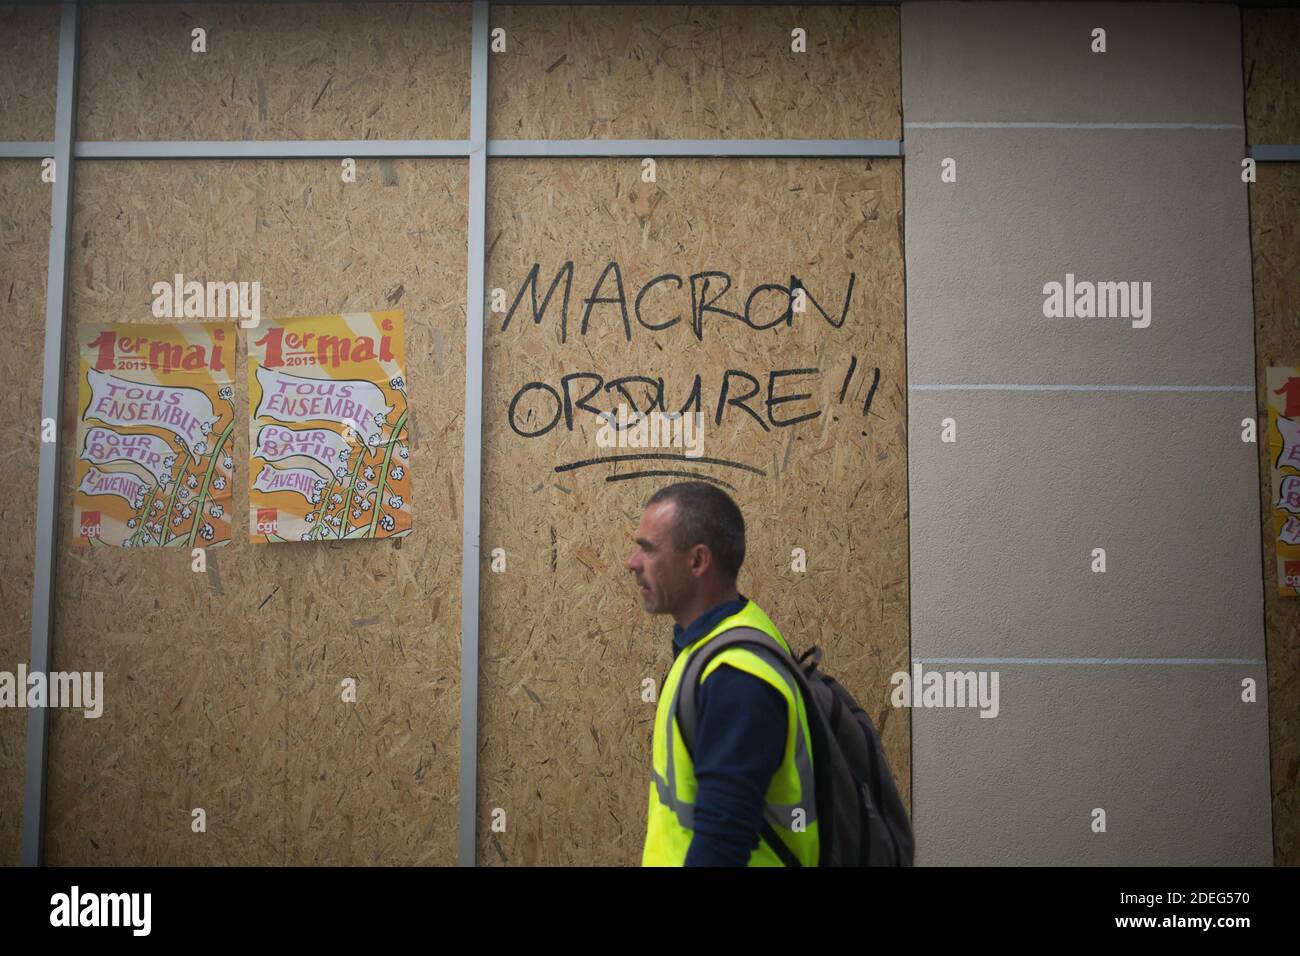 Graffiti Macron Ordure Macron garbage next to a yellow vest during the annual May Day rally protest in Paris on May 1, 2019. Paris riot police fired teargas as they squared off against hardline demonstrators among tens of thousands of May Day protesters, who flooded the city on May 1 in a test for France's zero-tolerance policy on street violence. Photo by Raphaël Lafargue/ABACAPRESS.COM Stock Photo